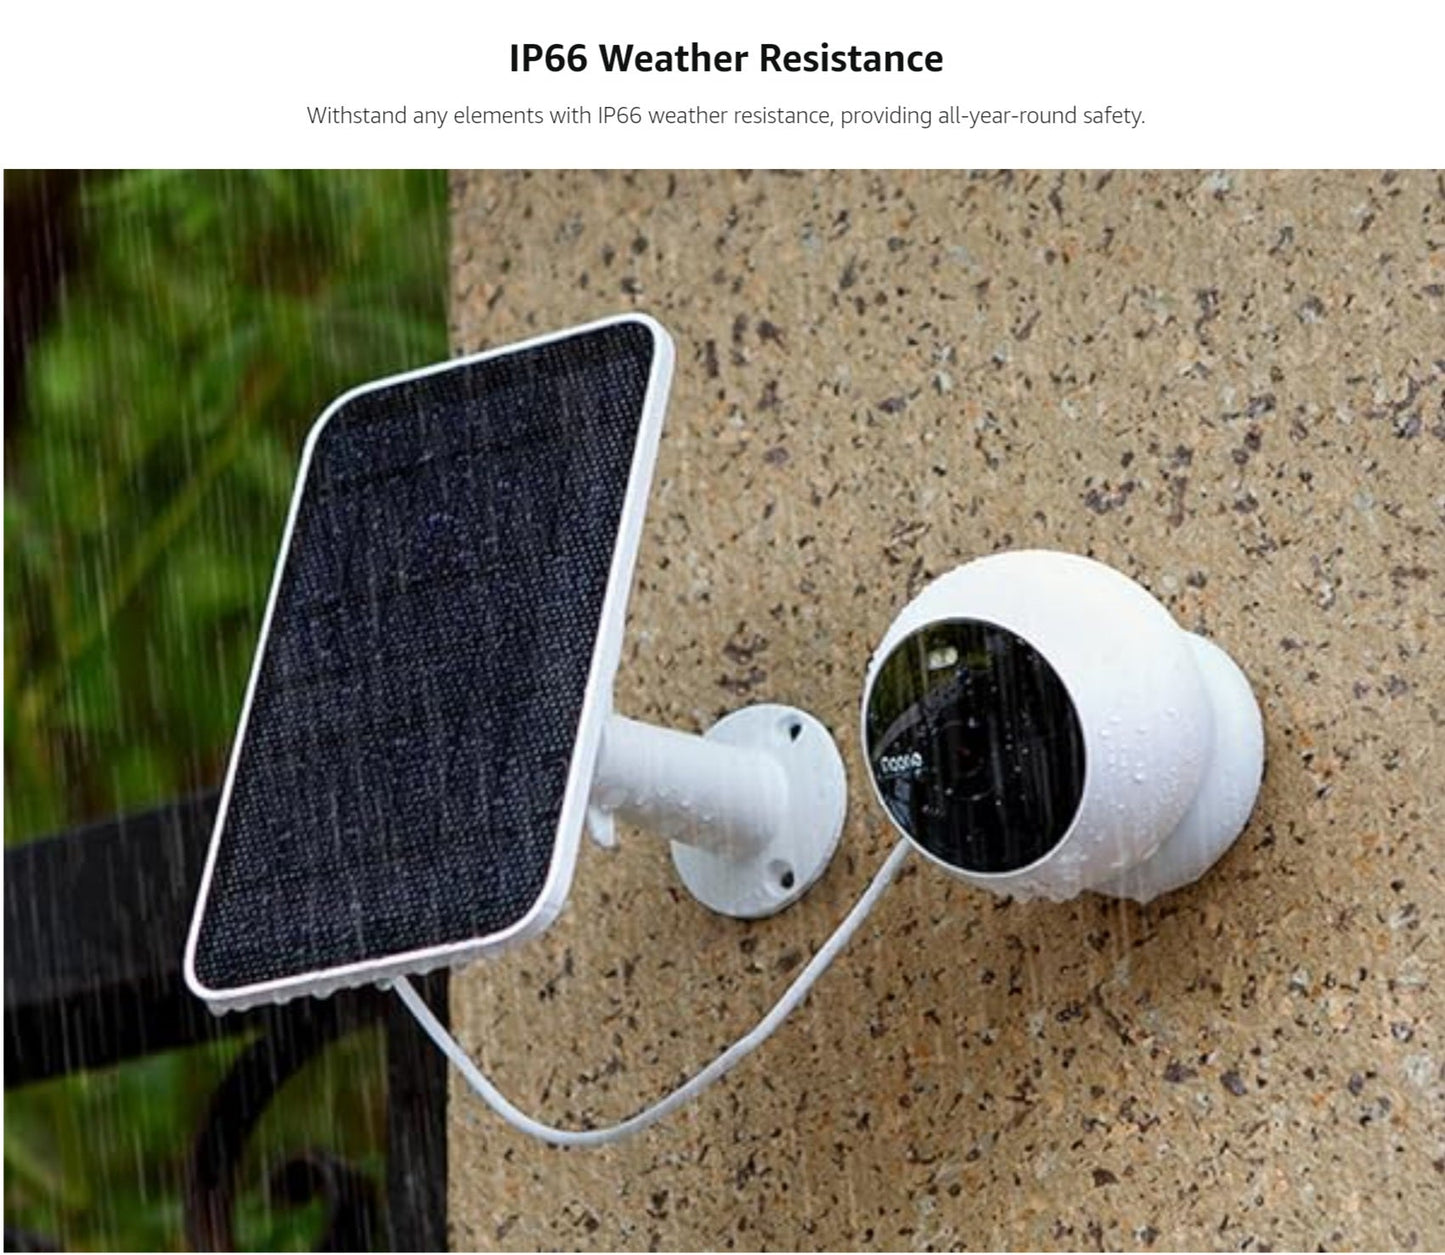 Noorio B200 Security Camera Outdoor Battery (Magnetic Base), HD Wireless System 1080p, Two-Way Talk, Color Night Vision - Icespheric